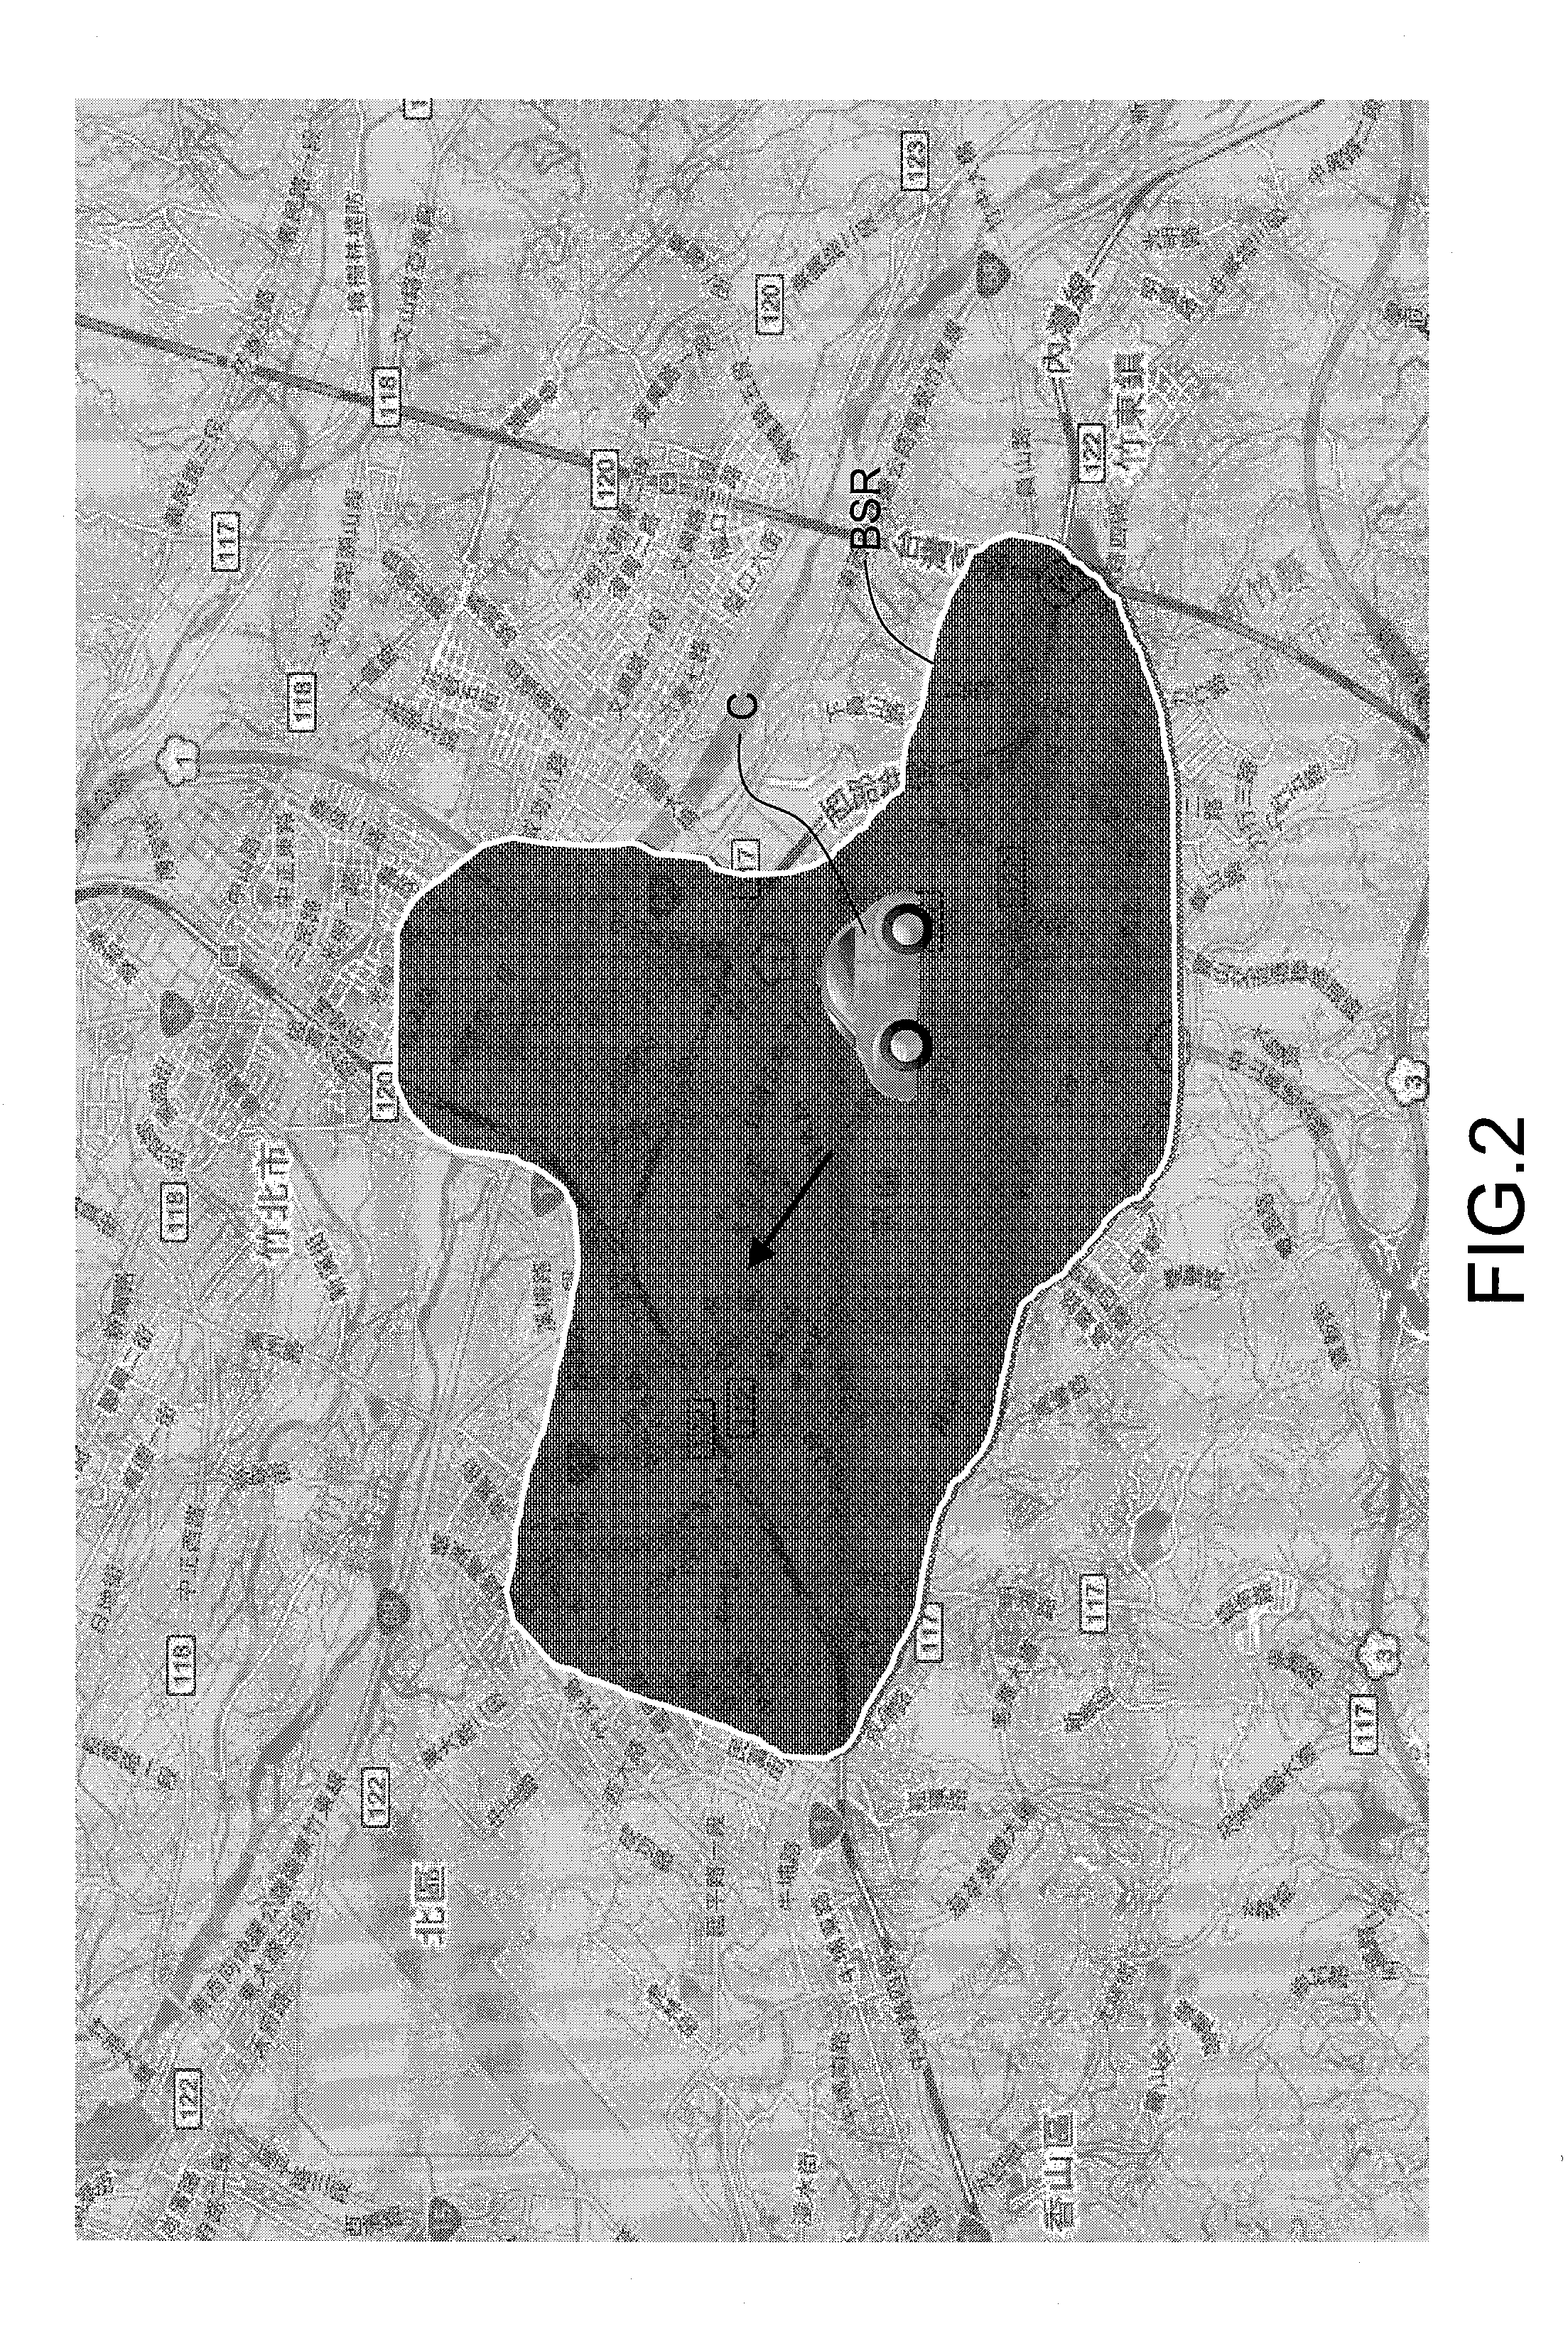 Driving assistant method and system for electric vehicle